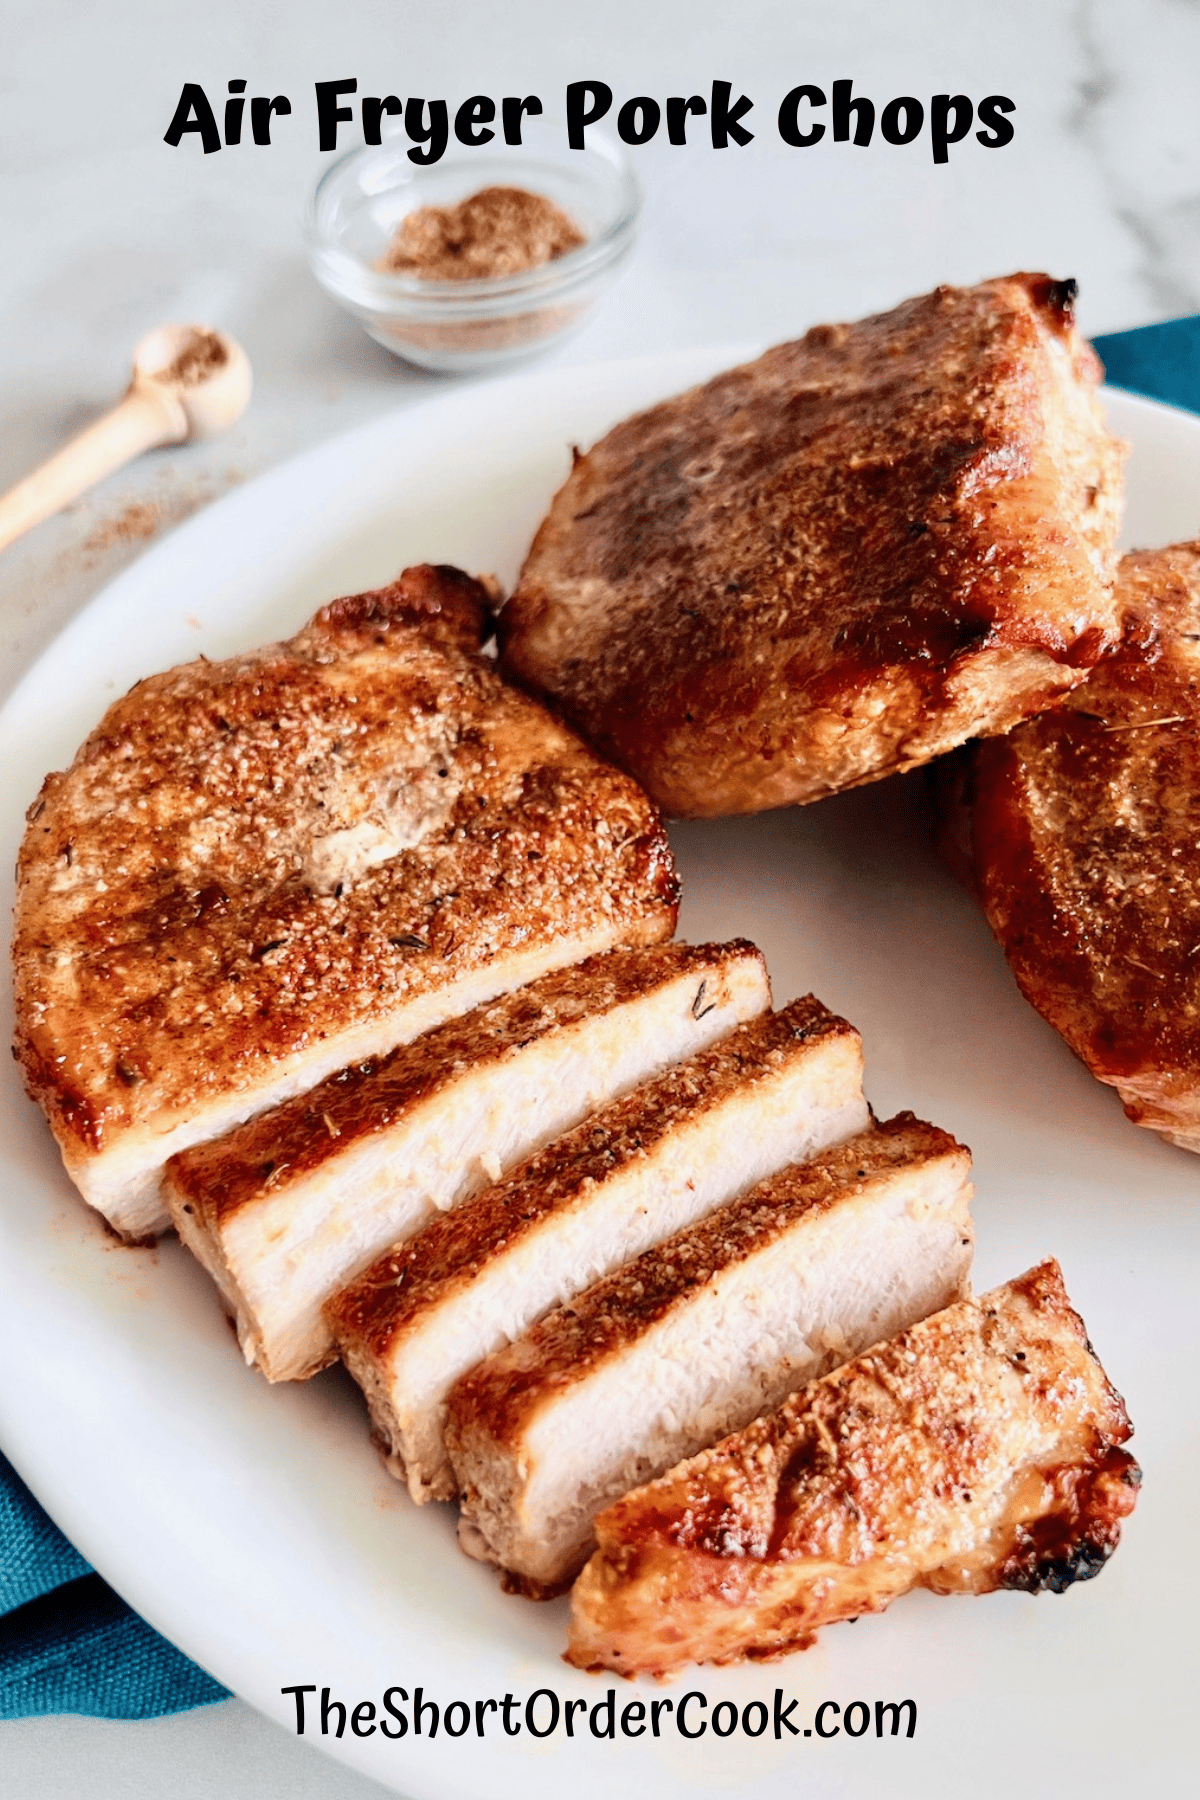 Gluten Free Air Fryer Pork Chops made without any breading